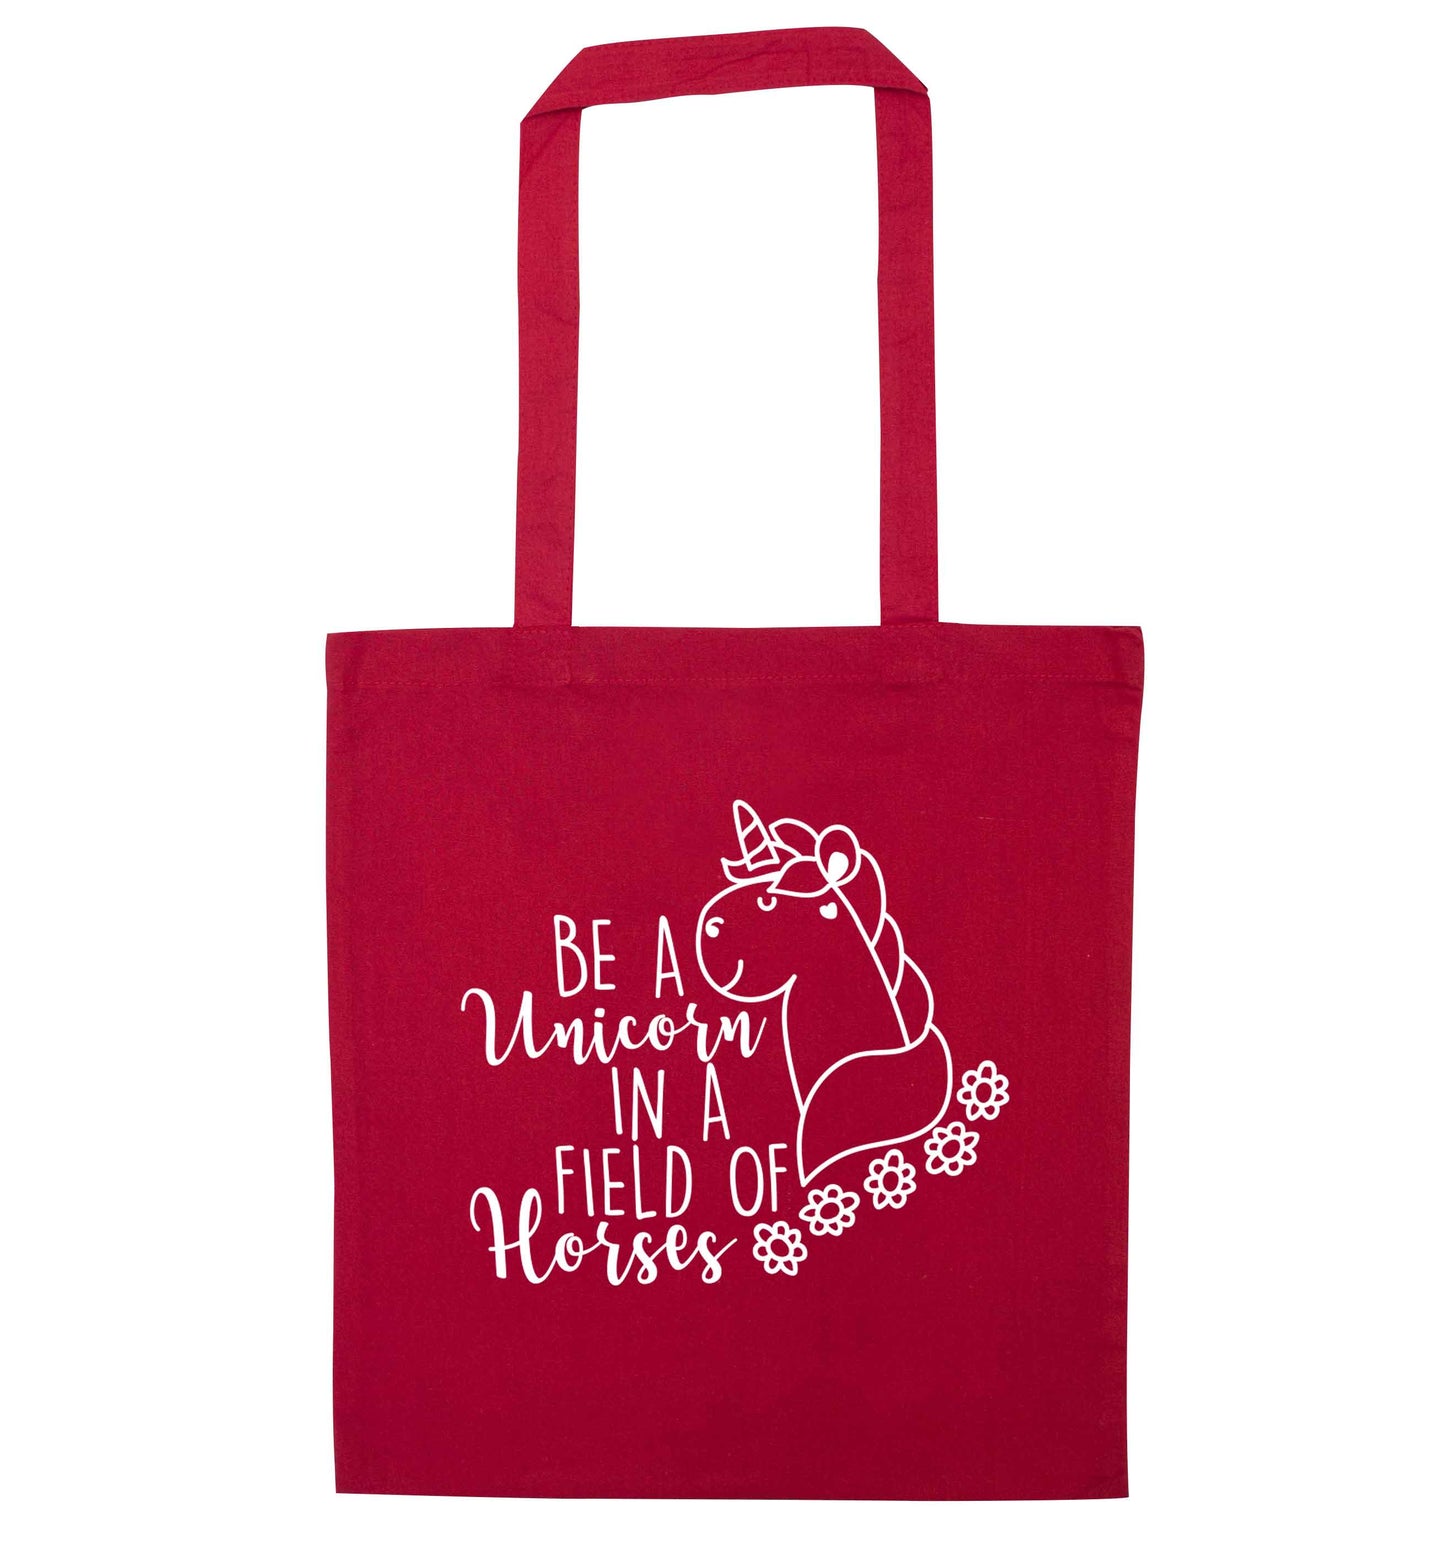 Be a unicorn in a field of horses red tote bag